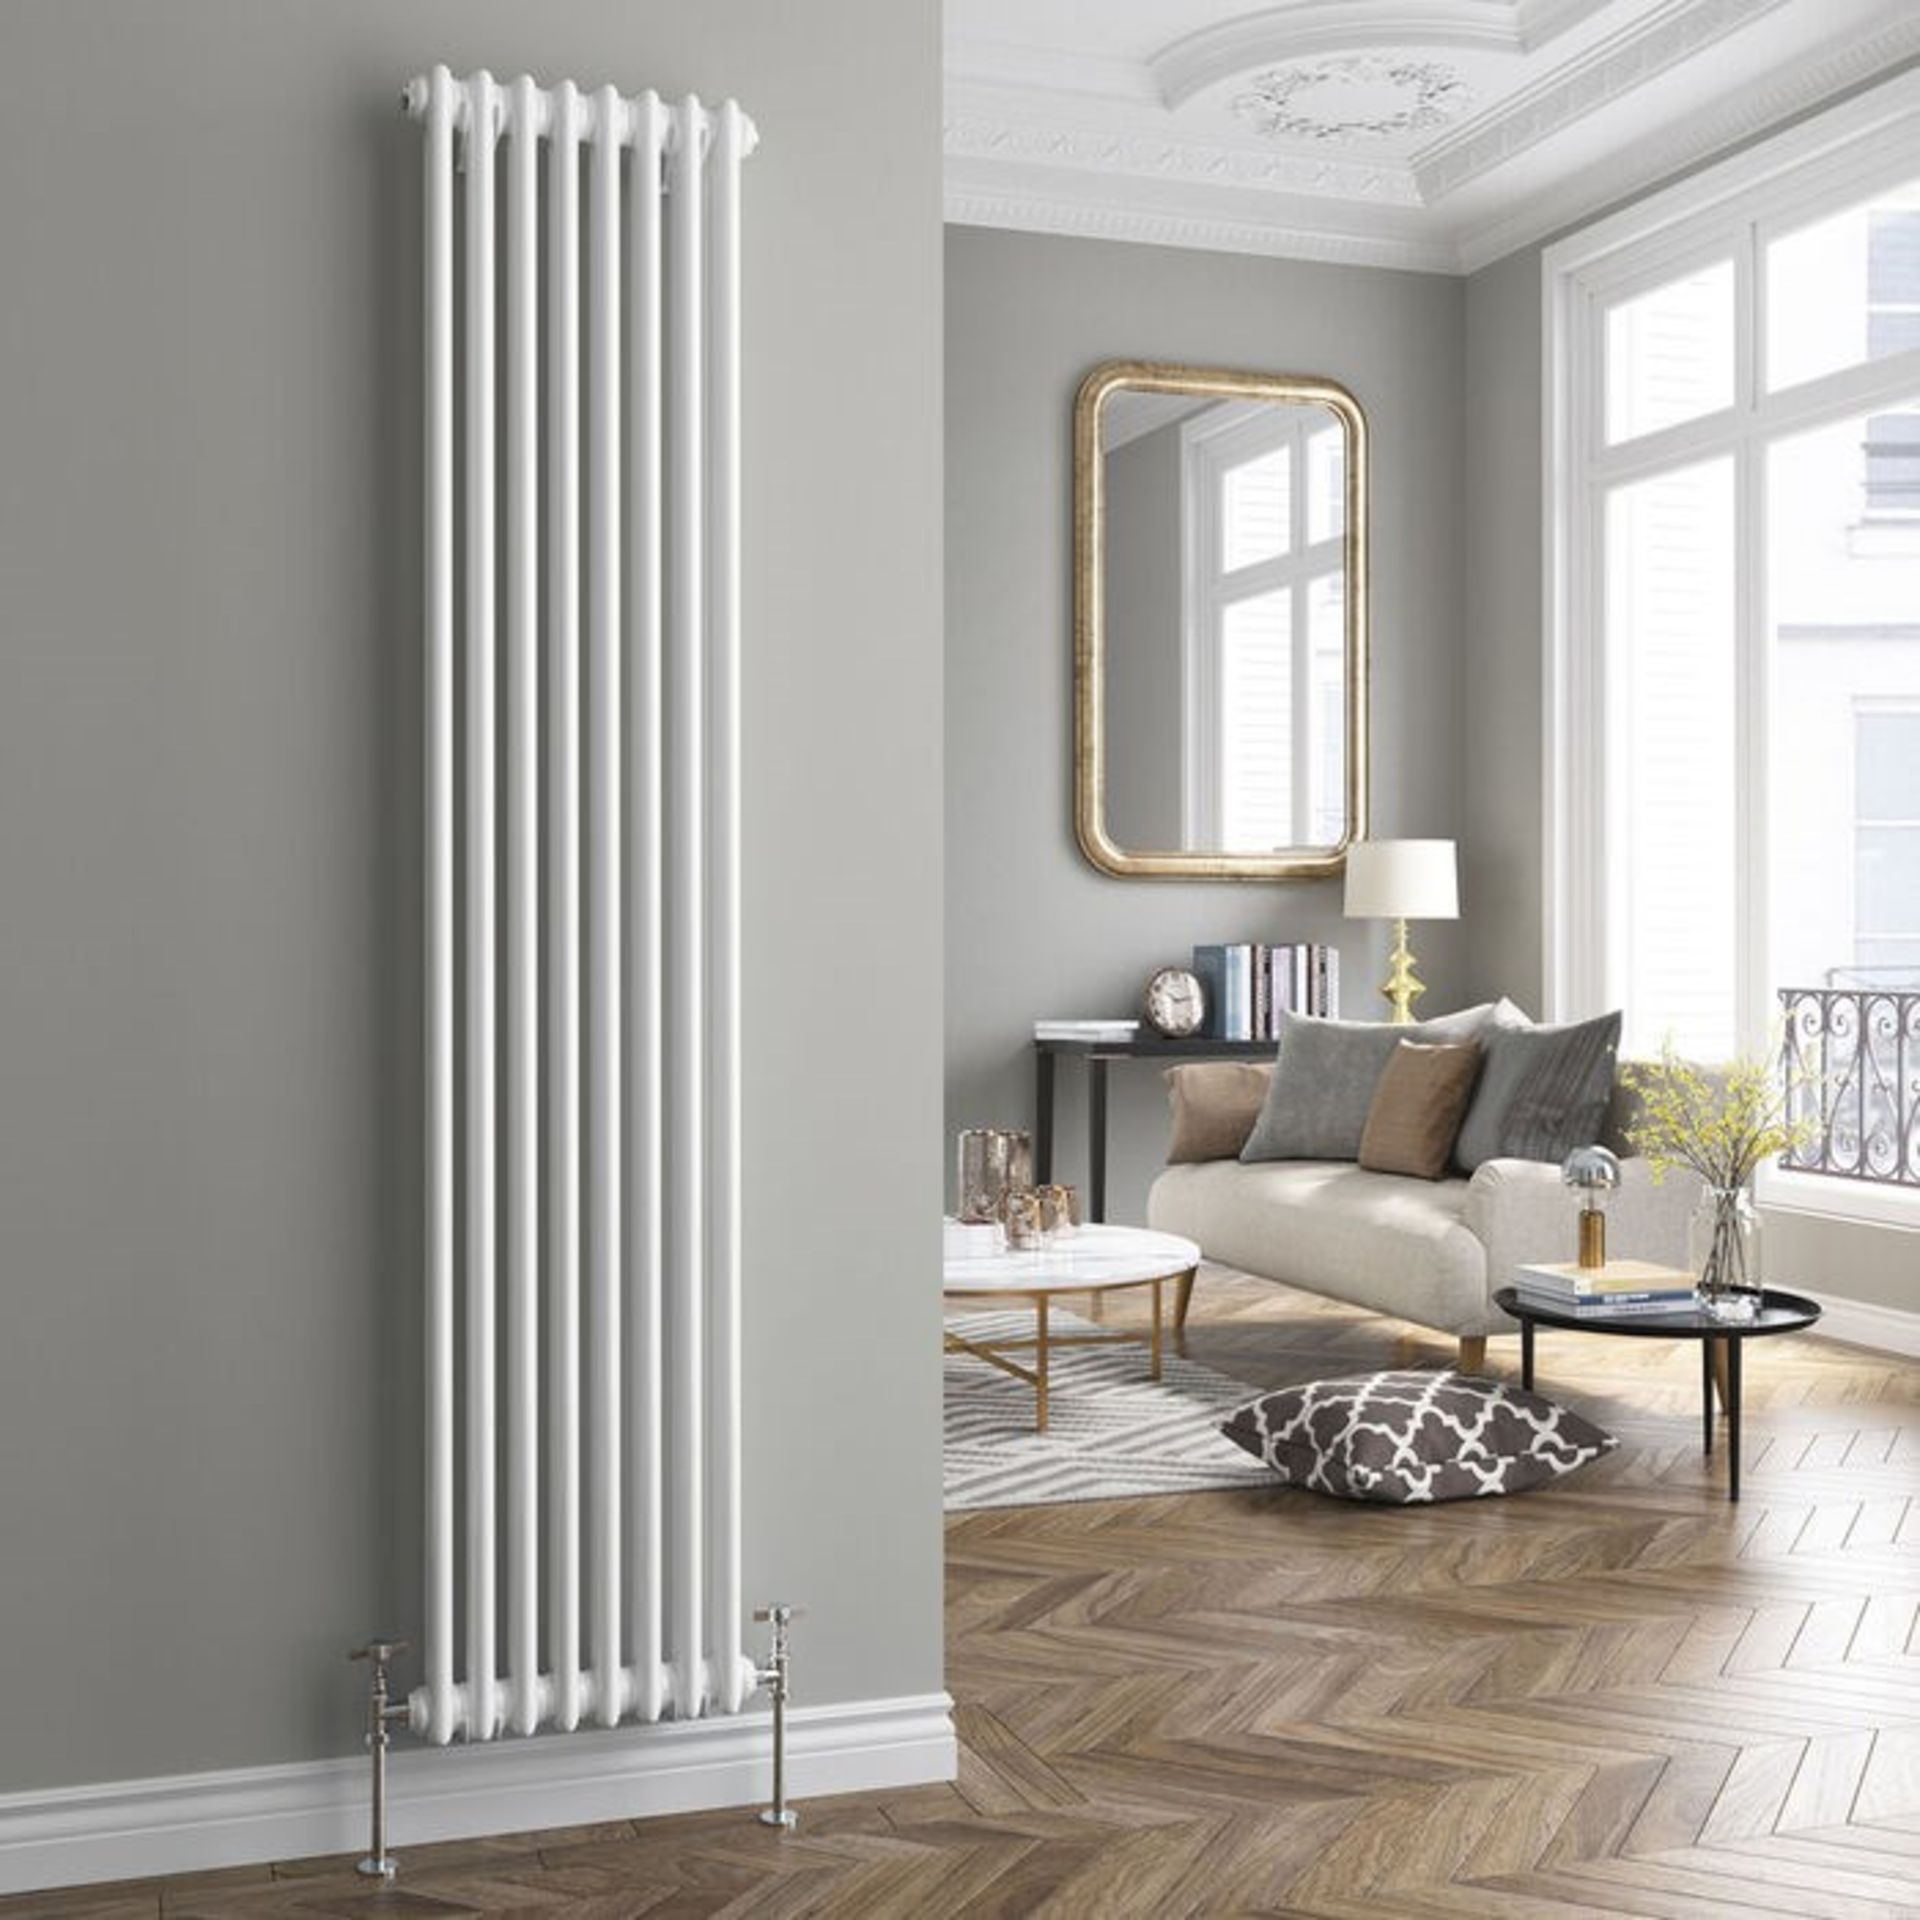 DD112) 2000x350mm White Double Panel Vertical Colosseum Traditional Radiator.RRP £429.99.For a... - Image 2 of 3